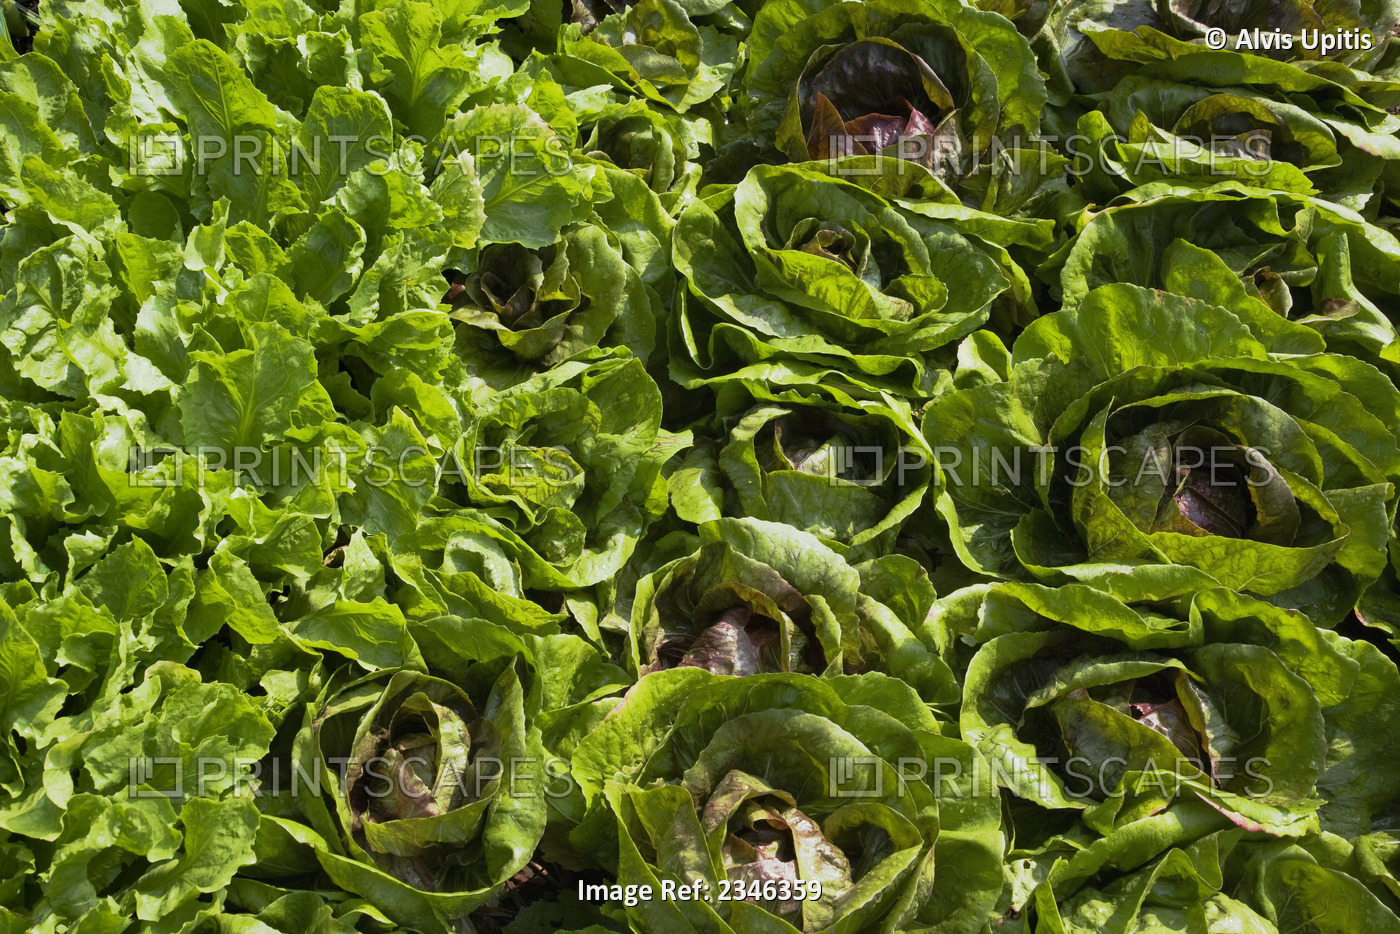 Agriculture - Side-by-side crops of organic green leaf lettuce (left) and red ...